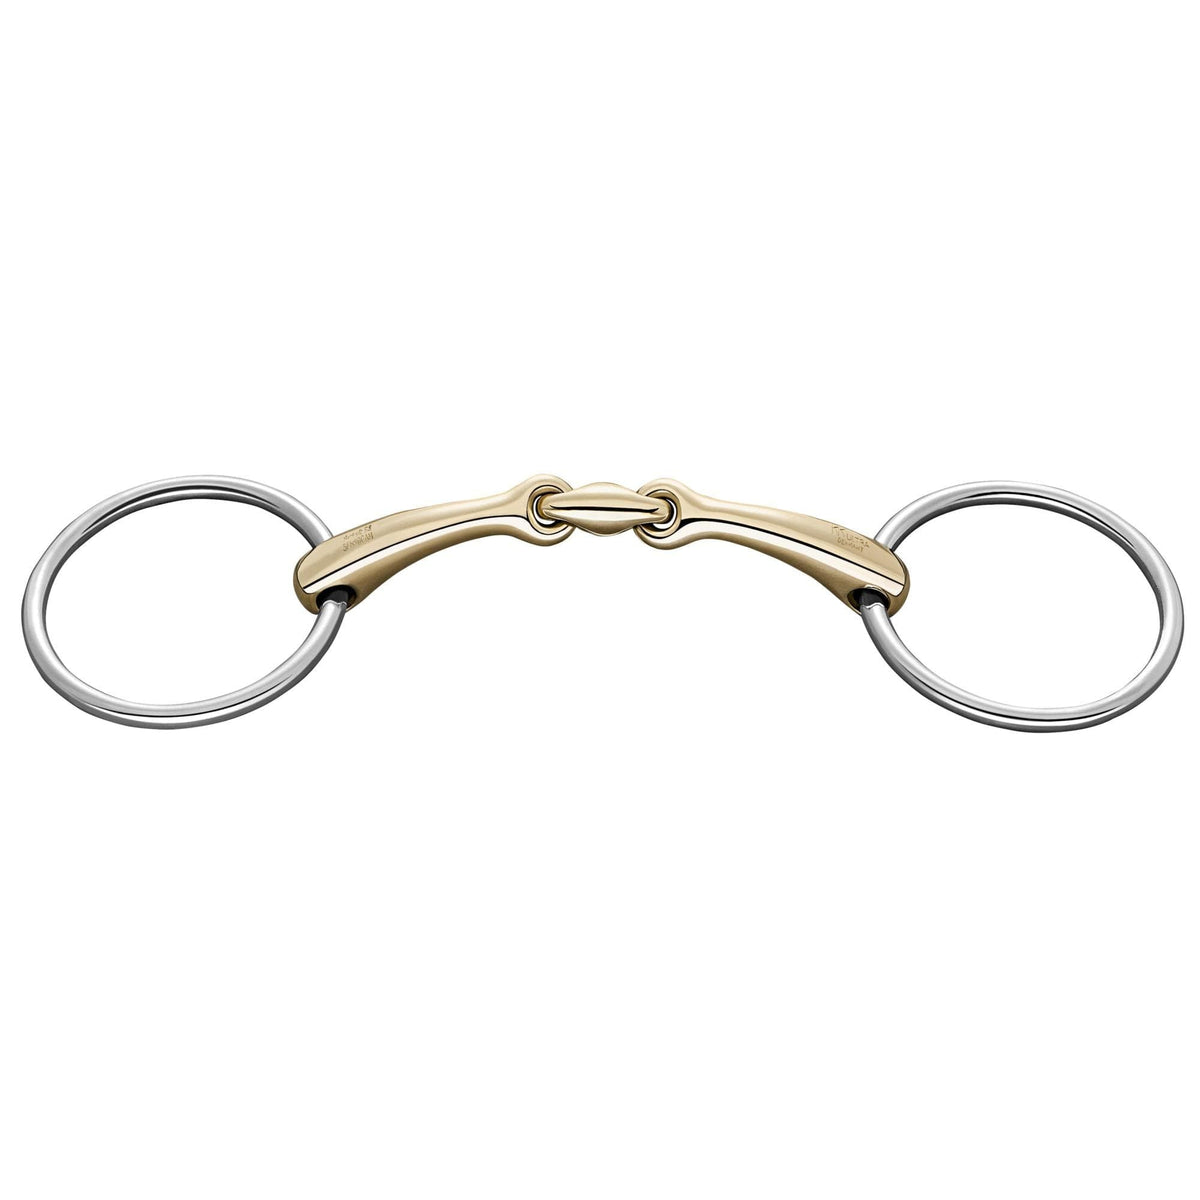 HERM SPRENGER BITS & ACCESSORIES Sprenger Dynamic Rs Loose Ring Double Jointed Snaffle Bit